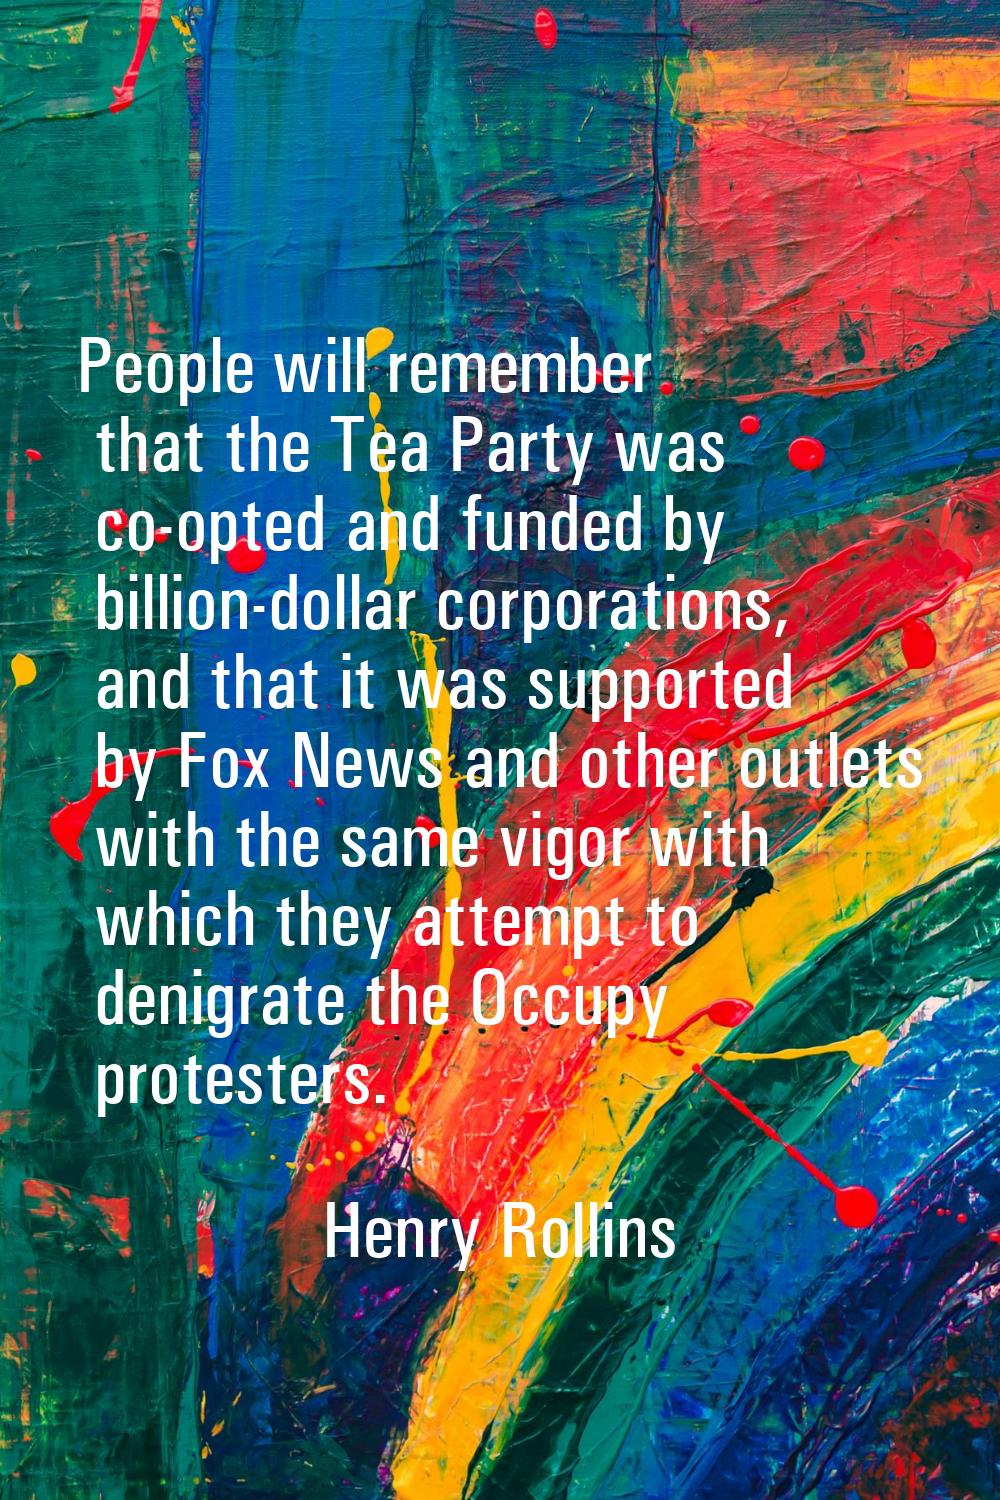 People will remember that the Tea Party was co-opted and funded by billion-dollar corporations, and